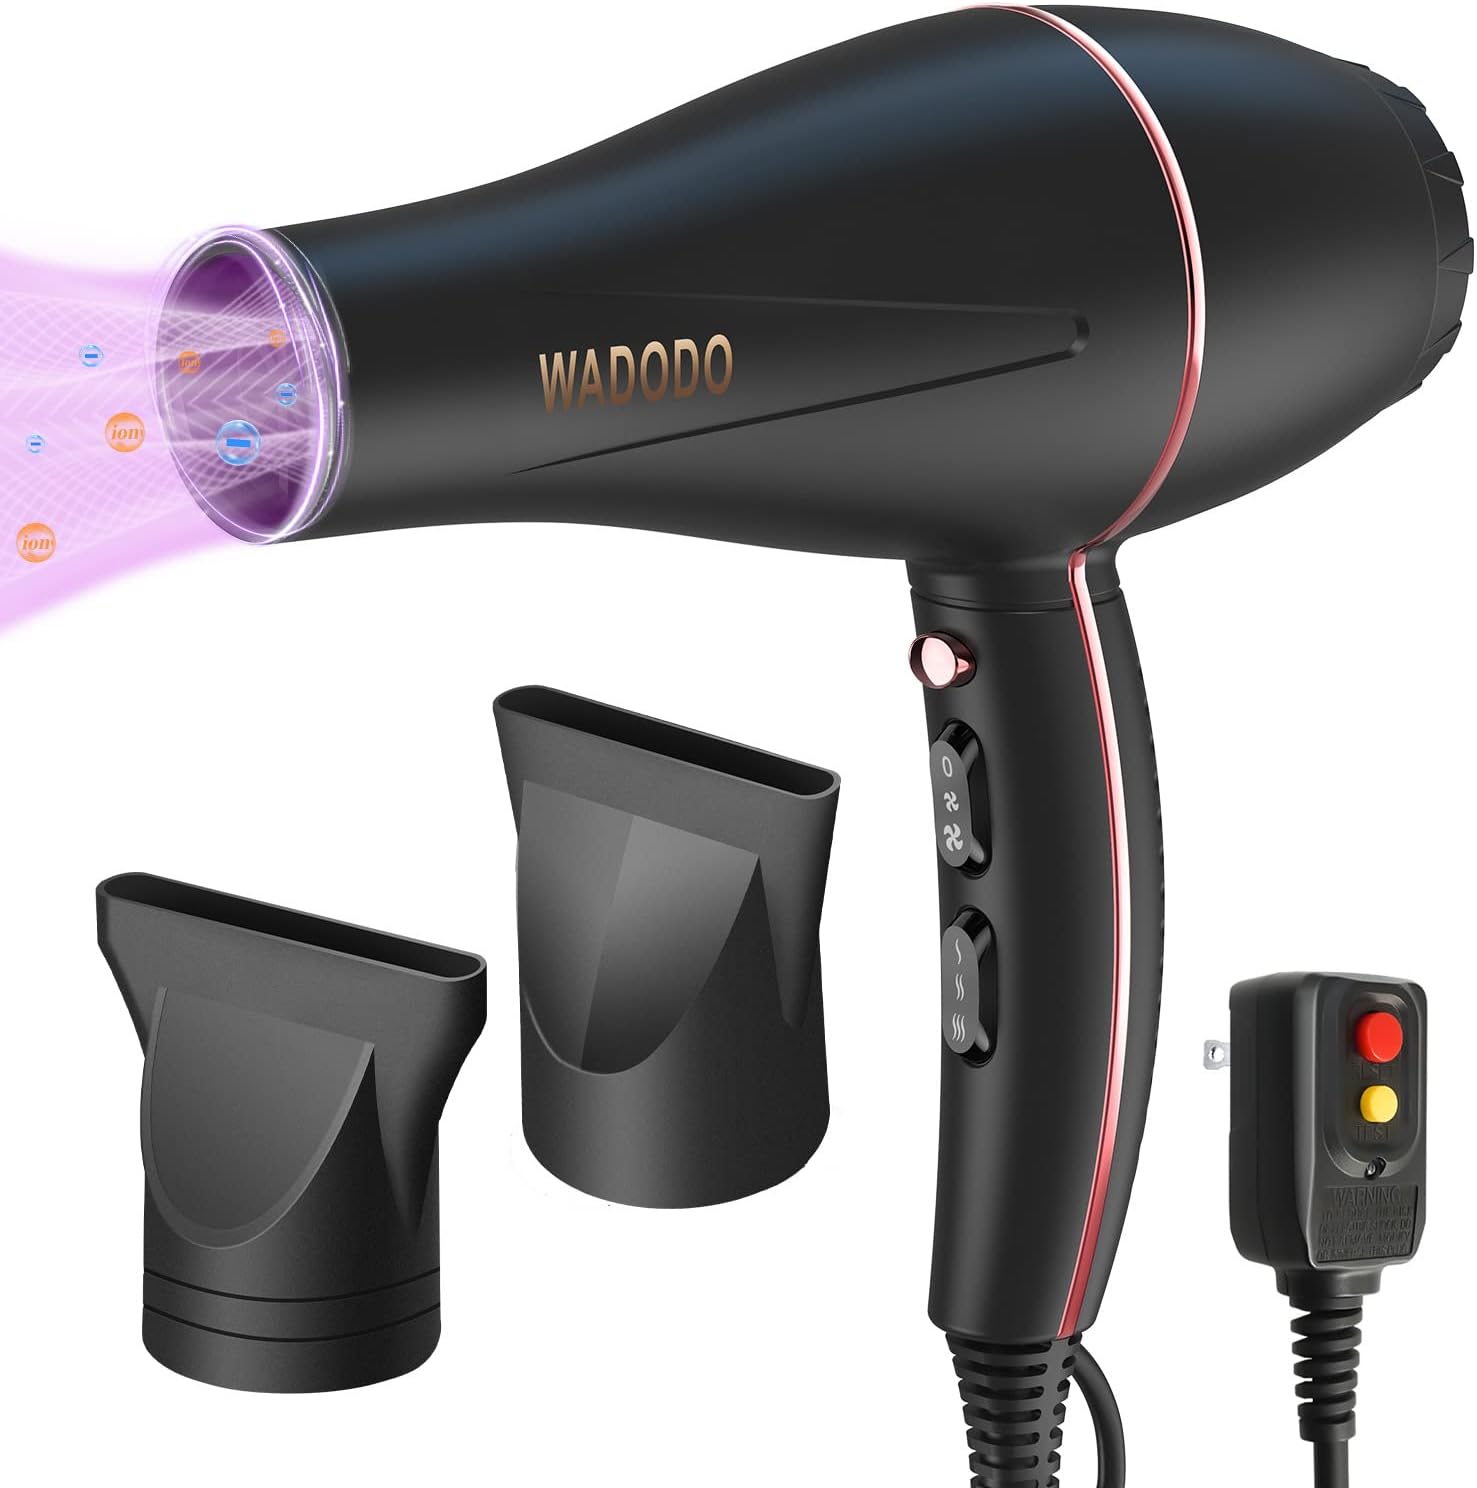 Ionic Hair Dryer, 2200W Professional Blow Dryer Fast Drying Travel AC Motor Constant Temperature Low Noise Ion Dryers Curly Care Hairdryer Blowdryer for Women Men